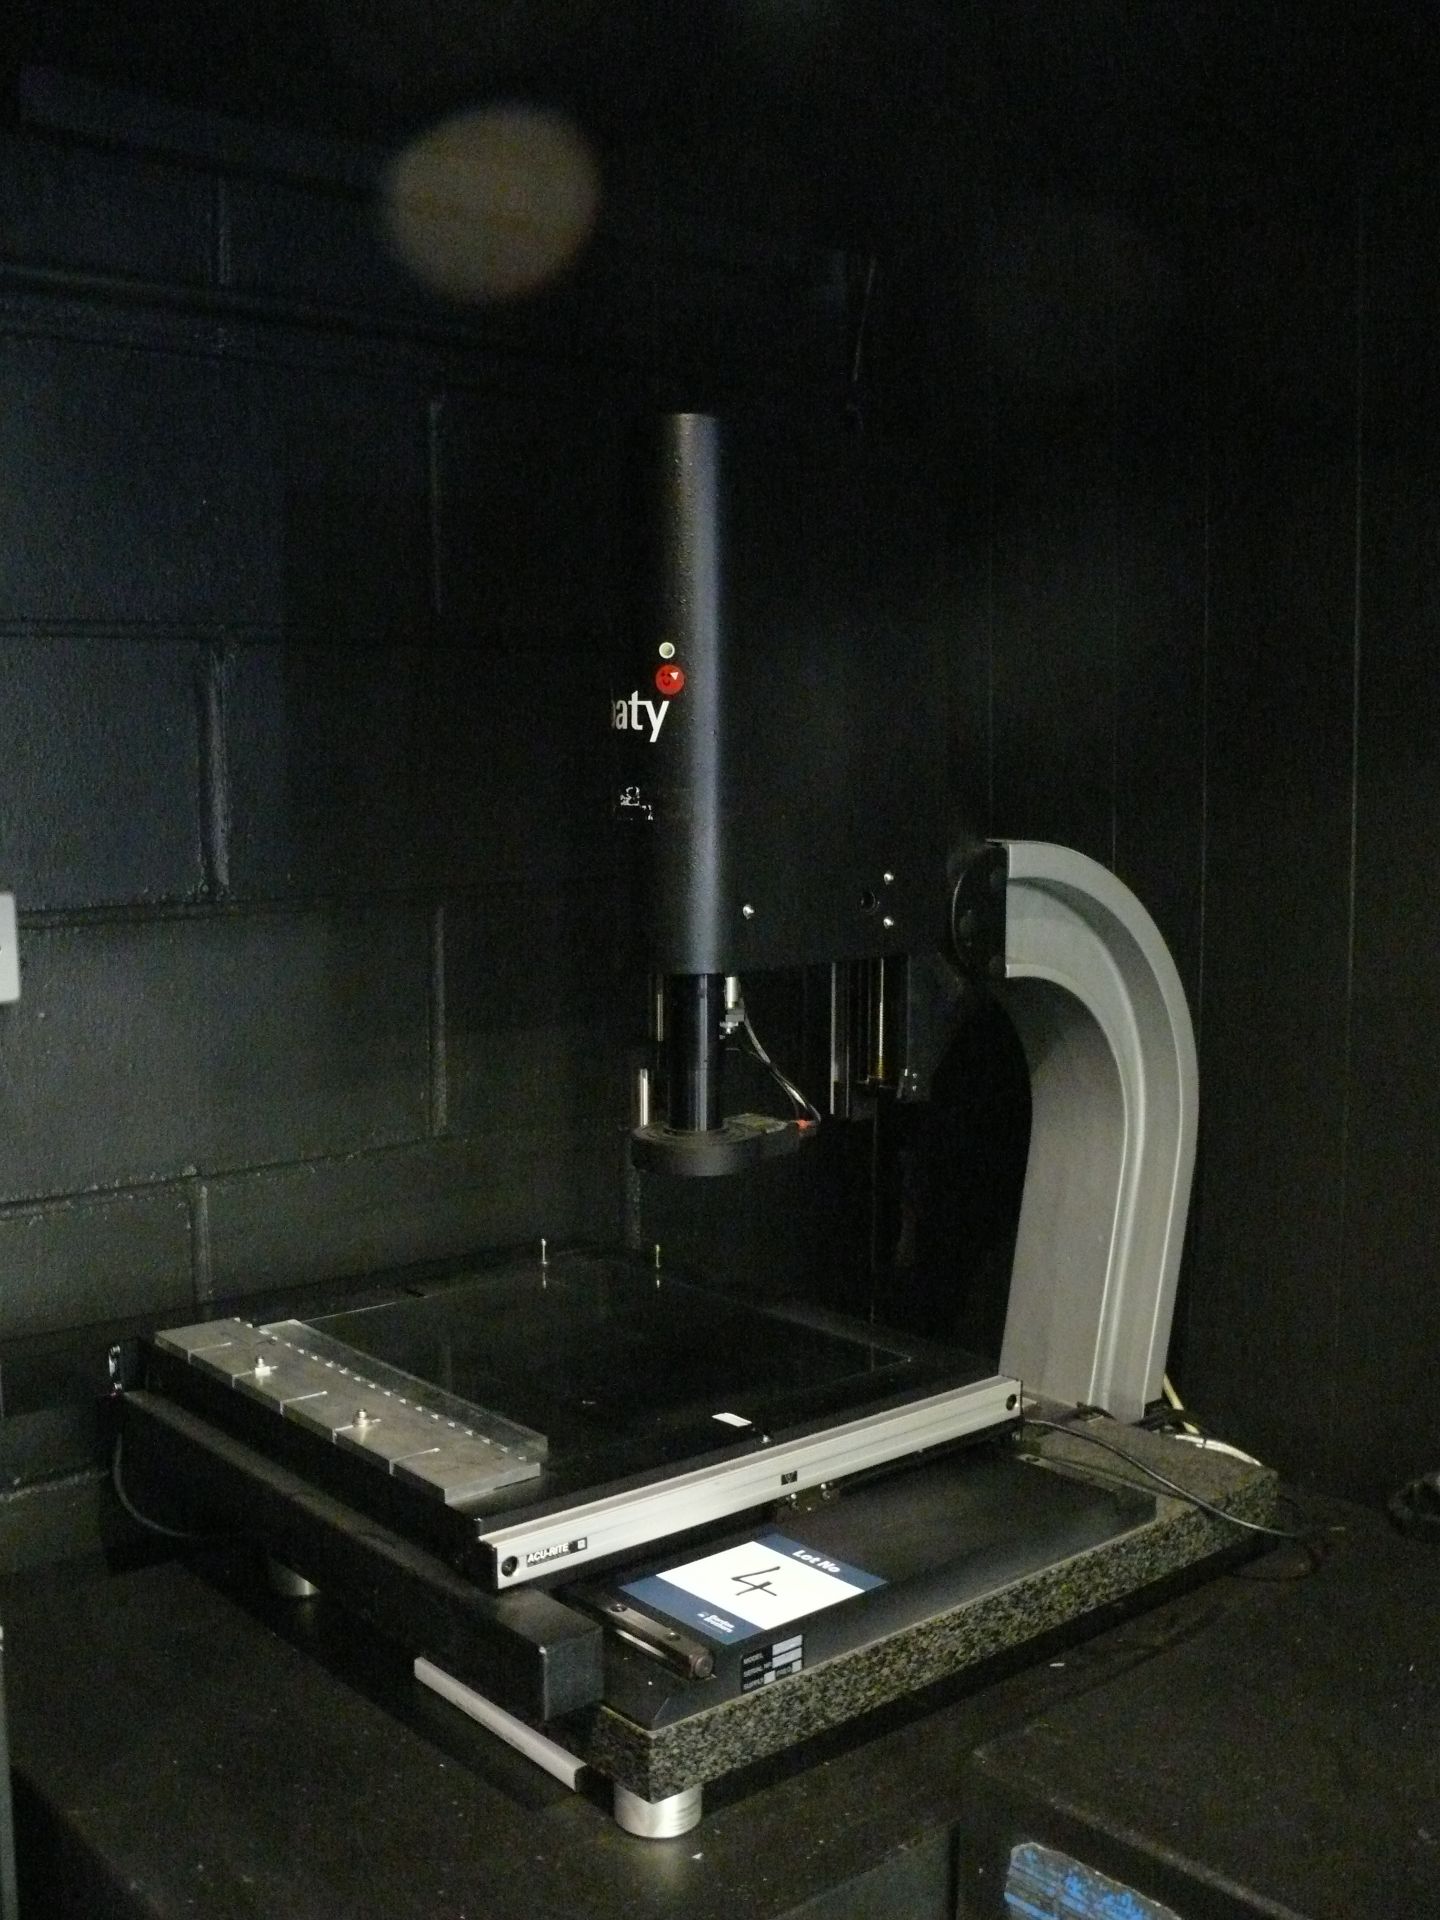 Baty Model V1U CNC 3030 3D automated inspection system, Serial No. 1135 with Acu-Rite inspection